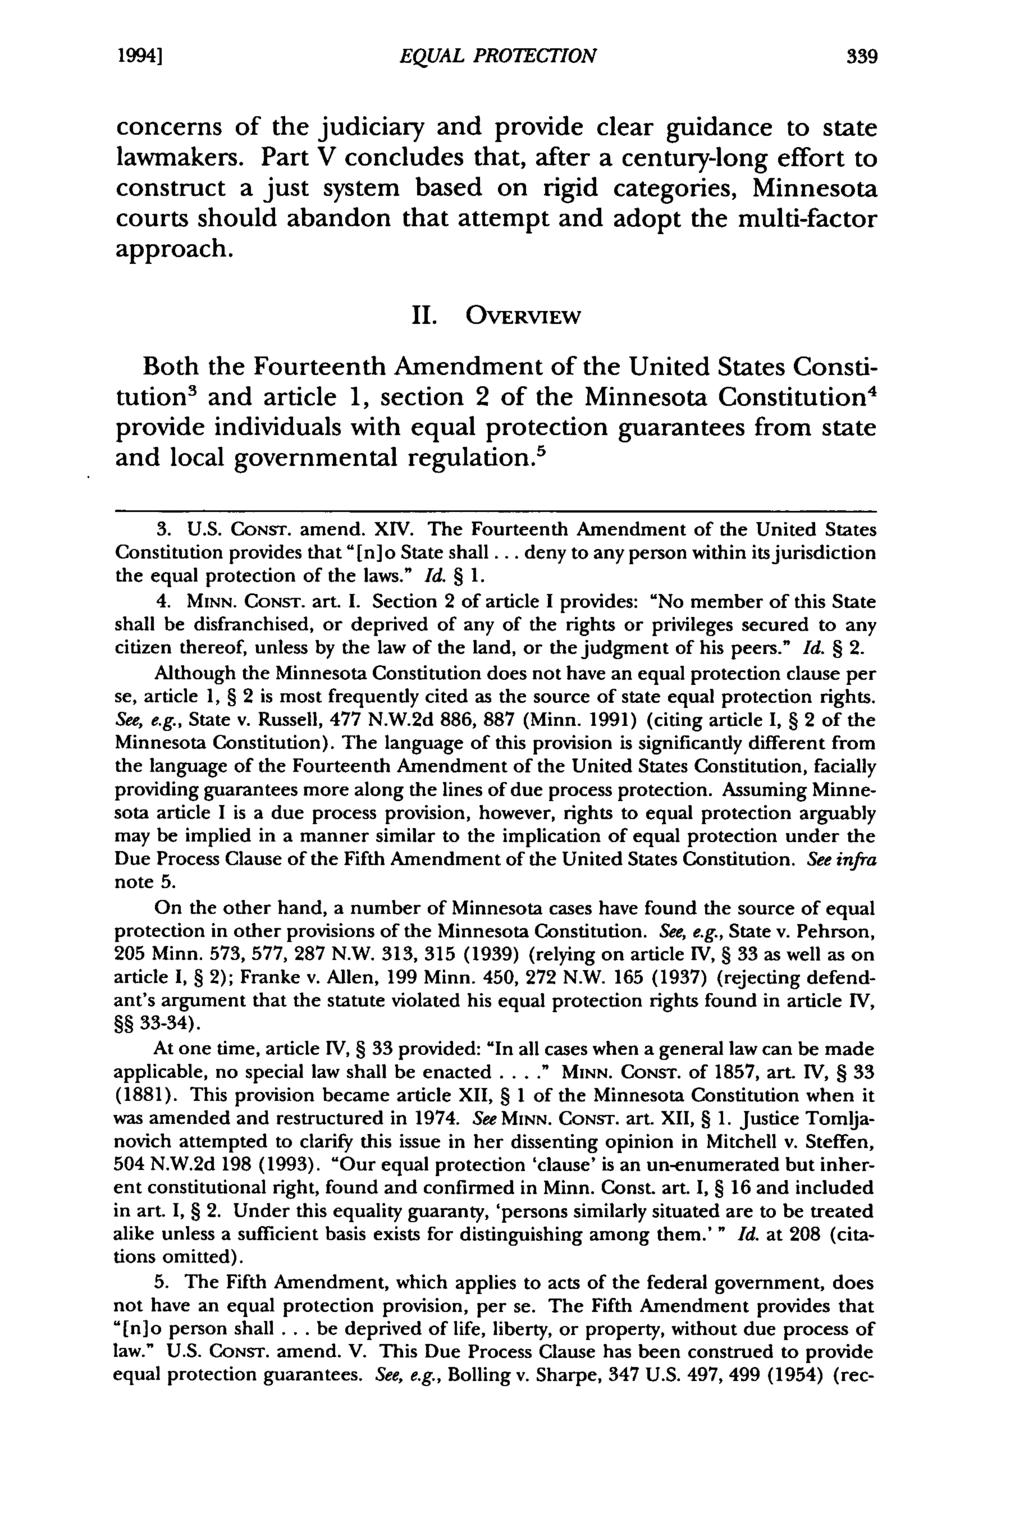 1994] Iijima: Minnesota Equal EQUAL Protection PROTECTION in the Third Millennium: "Old Formulat concerns of the judiciary and provide clear guidance to state lawmakers.